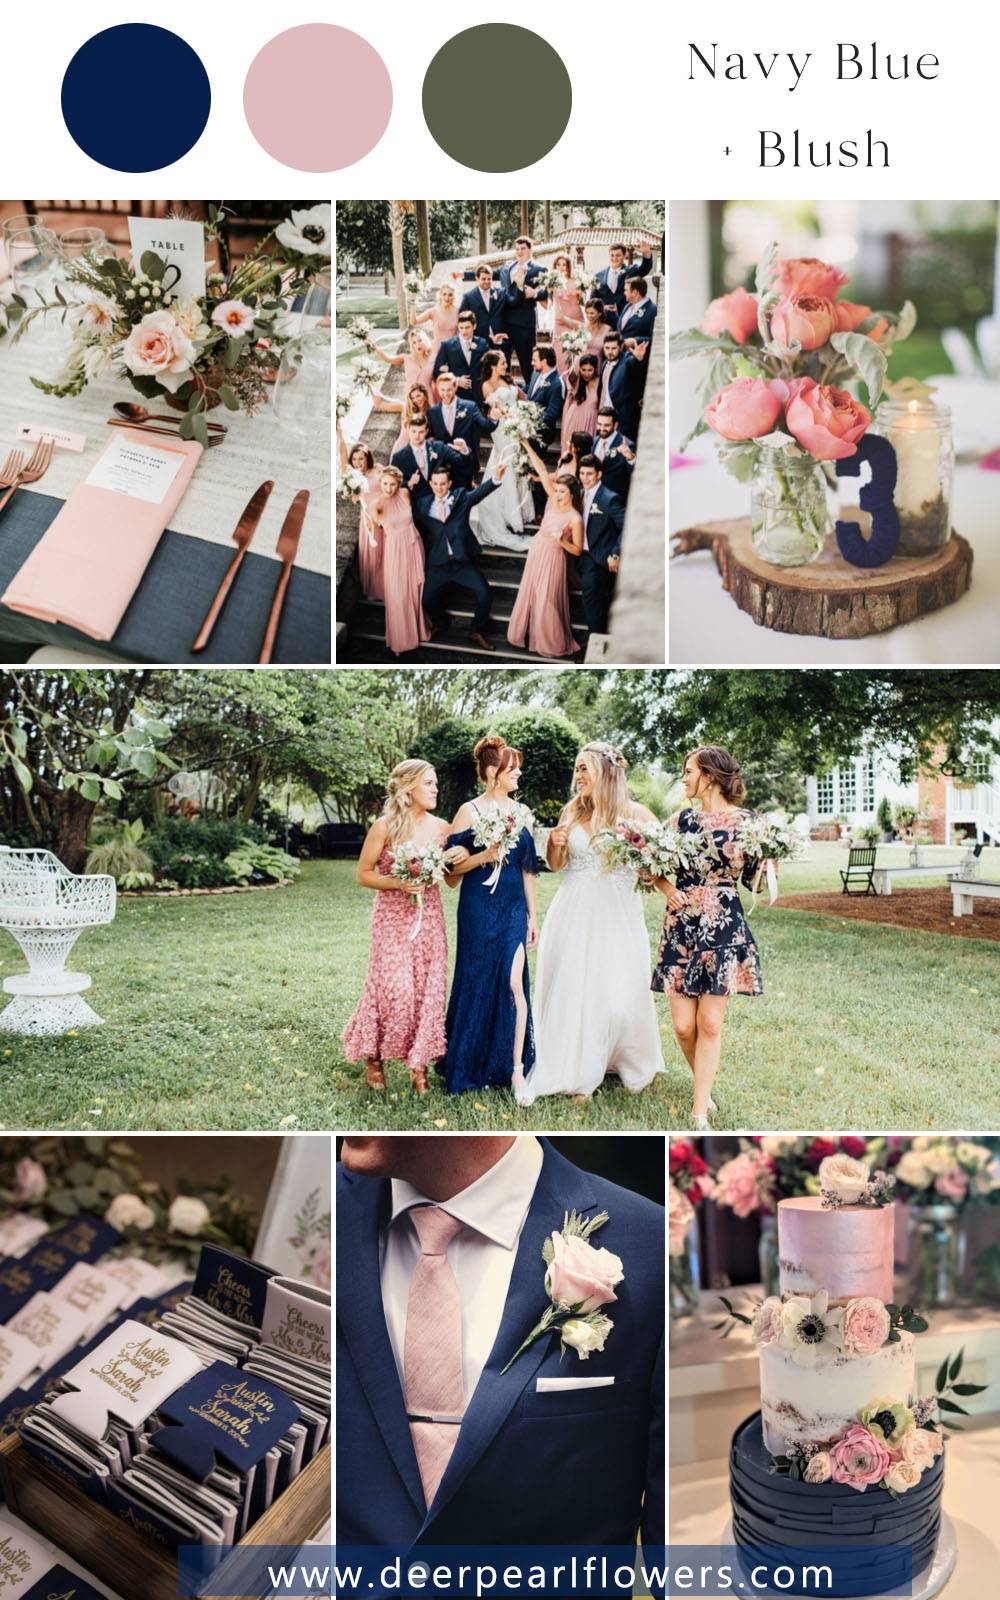 navy blue and blush wedding color schemes